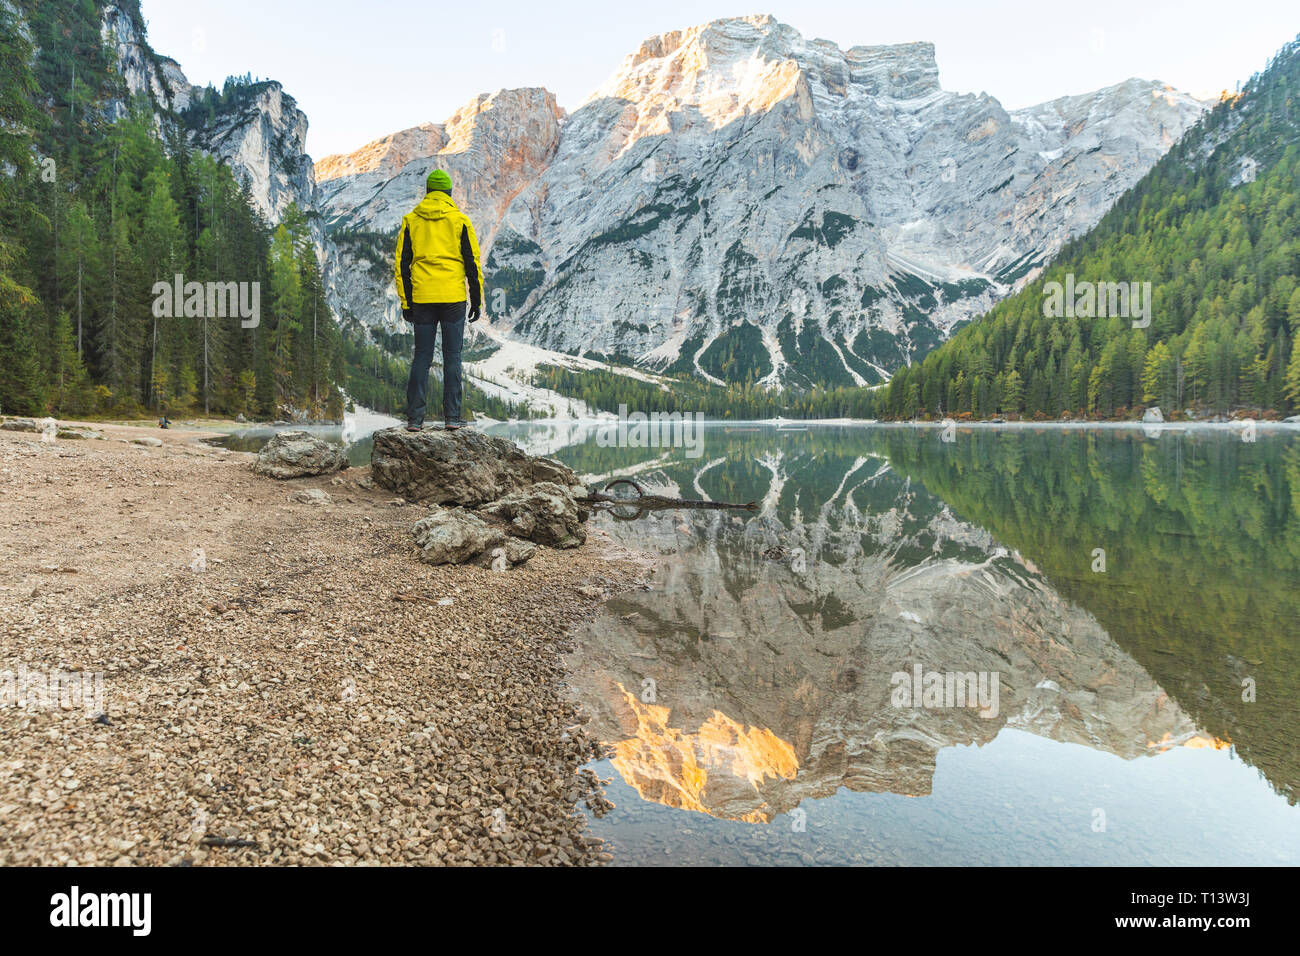 Italy, Braies Lake, man at the lakeside with mountains and forest in background Stock Photo